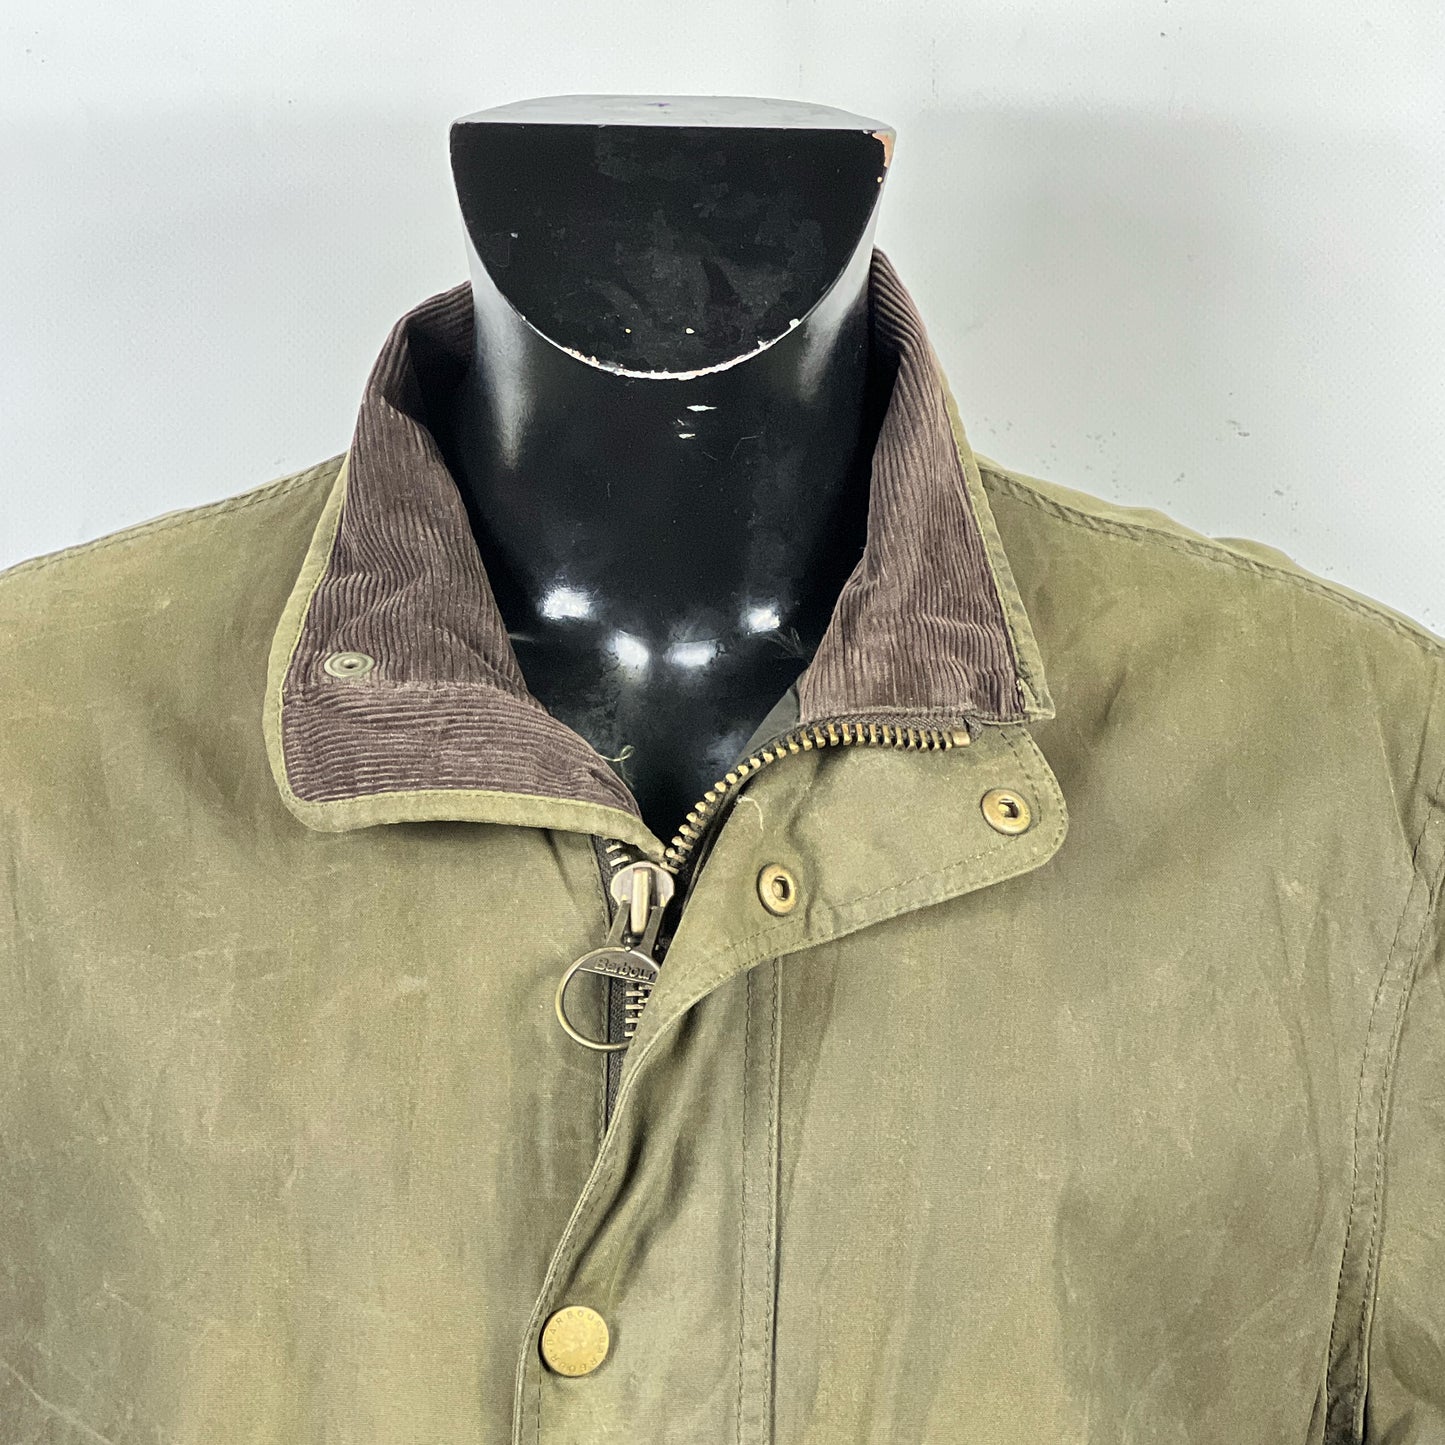 Giacca Barbour Verde New Hampshire Cerata XLarge - Man Green waxed jacket Size xl